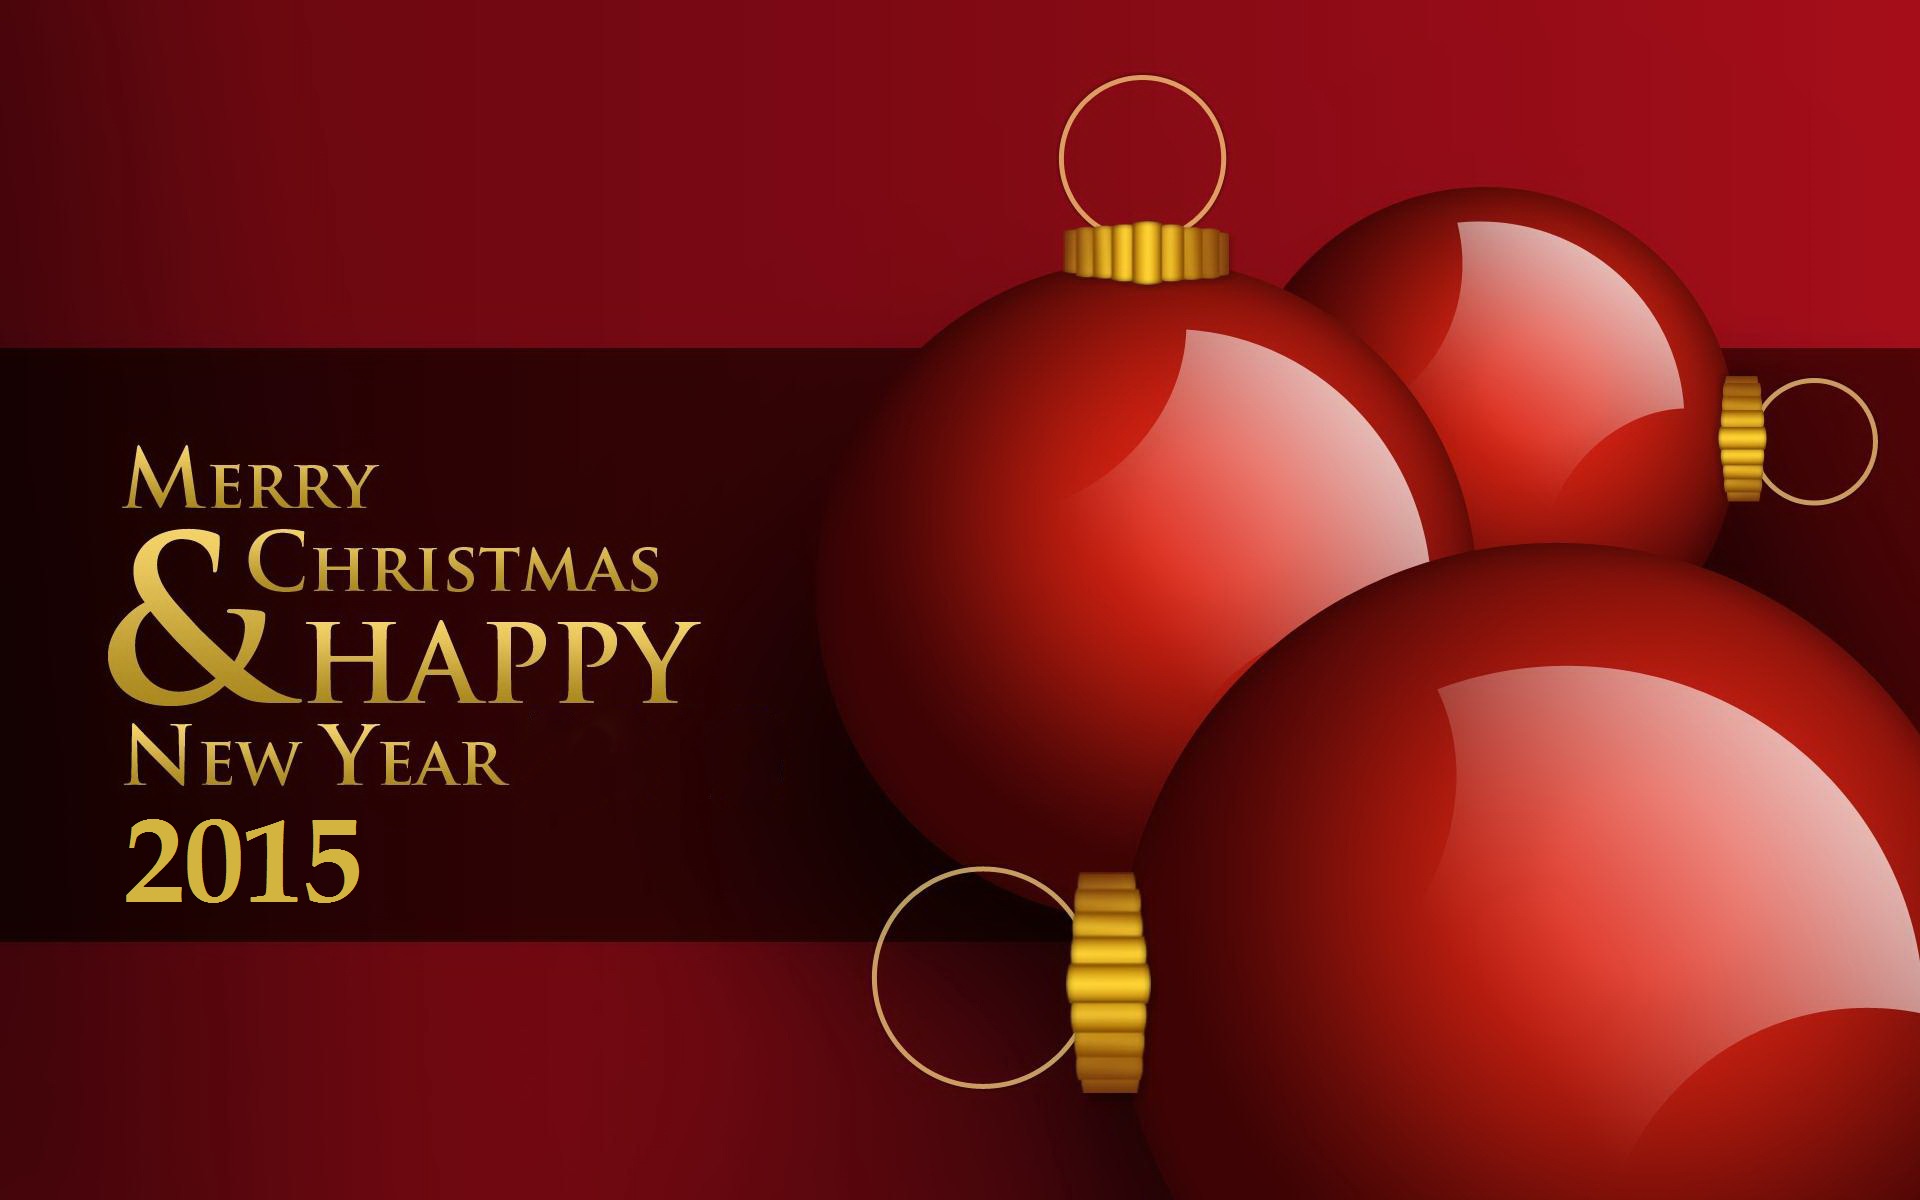 Merry Christmas And Happy New Year 2015 Wallpaper09 Merry Christmas